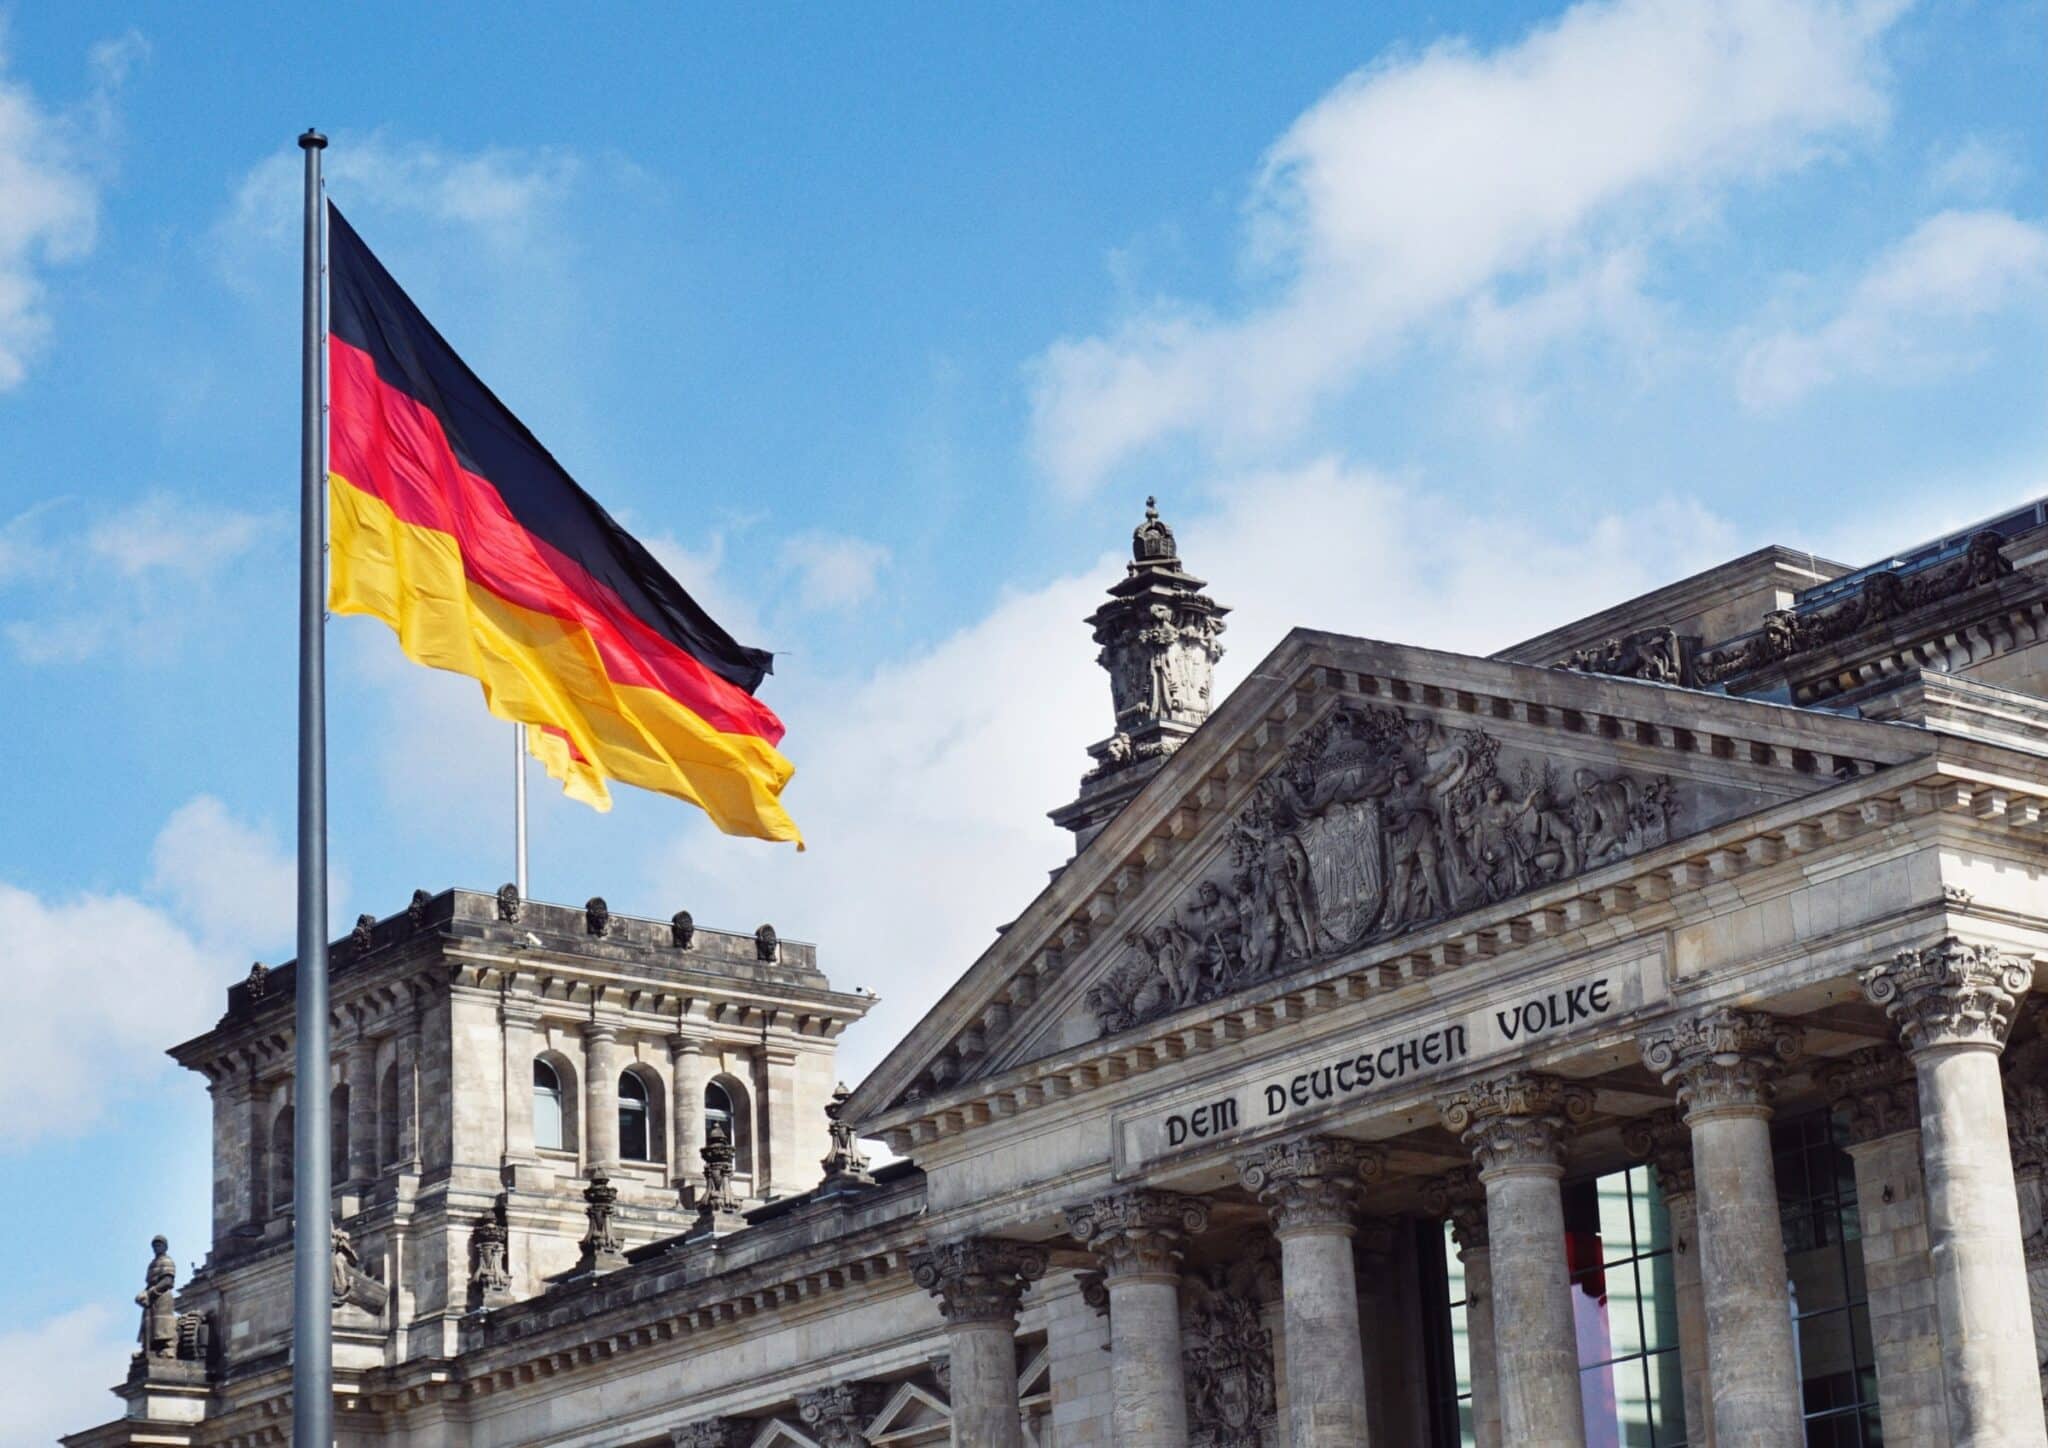 Annerton presents legal suggestions to crypto platform Coinpanion on German market entry